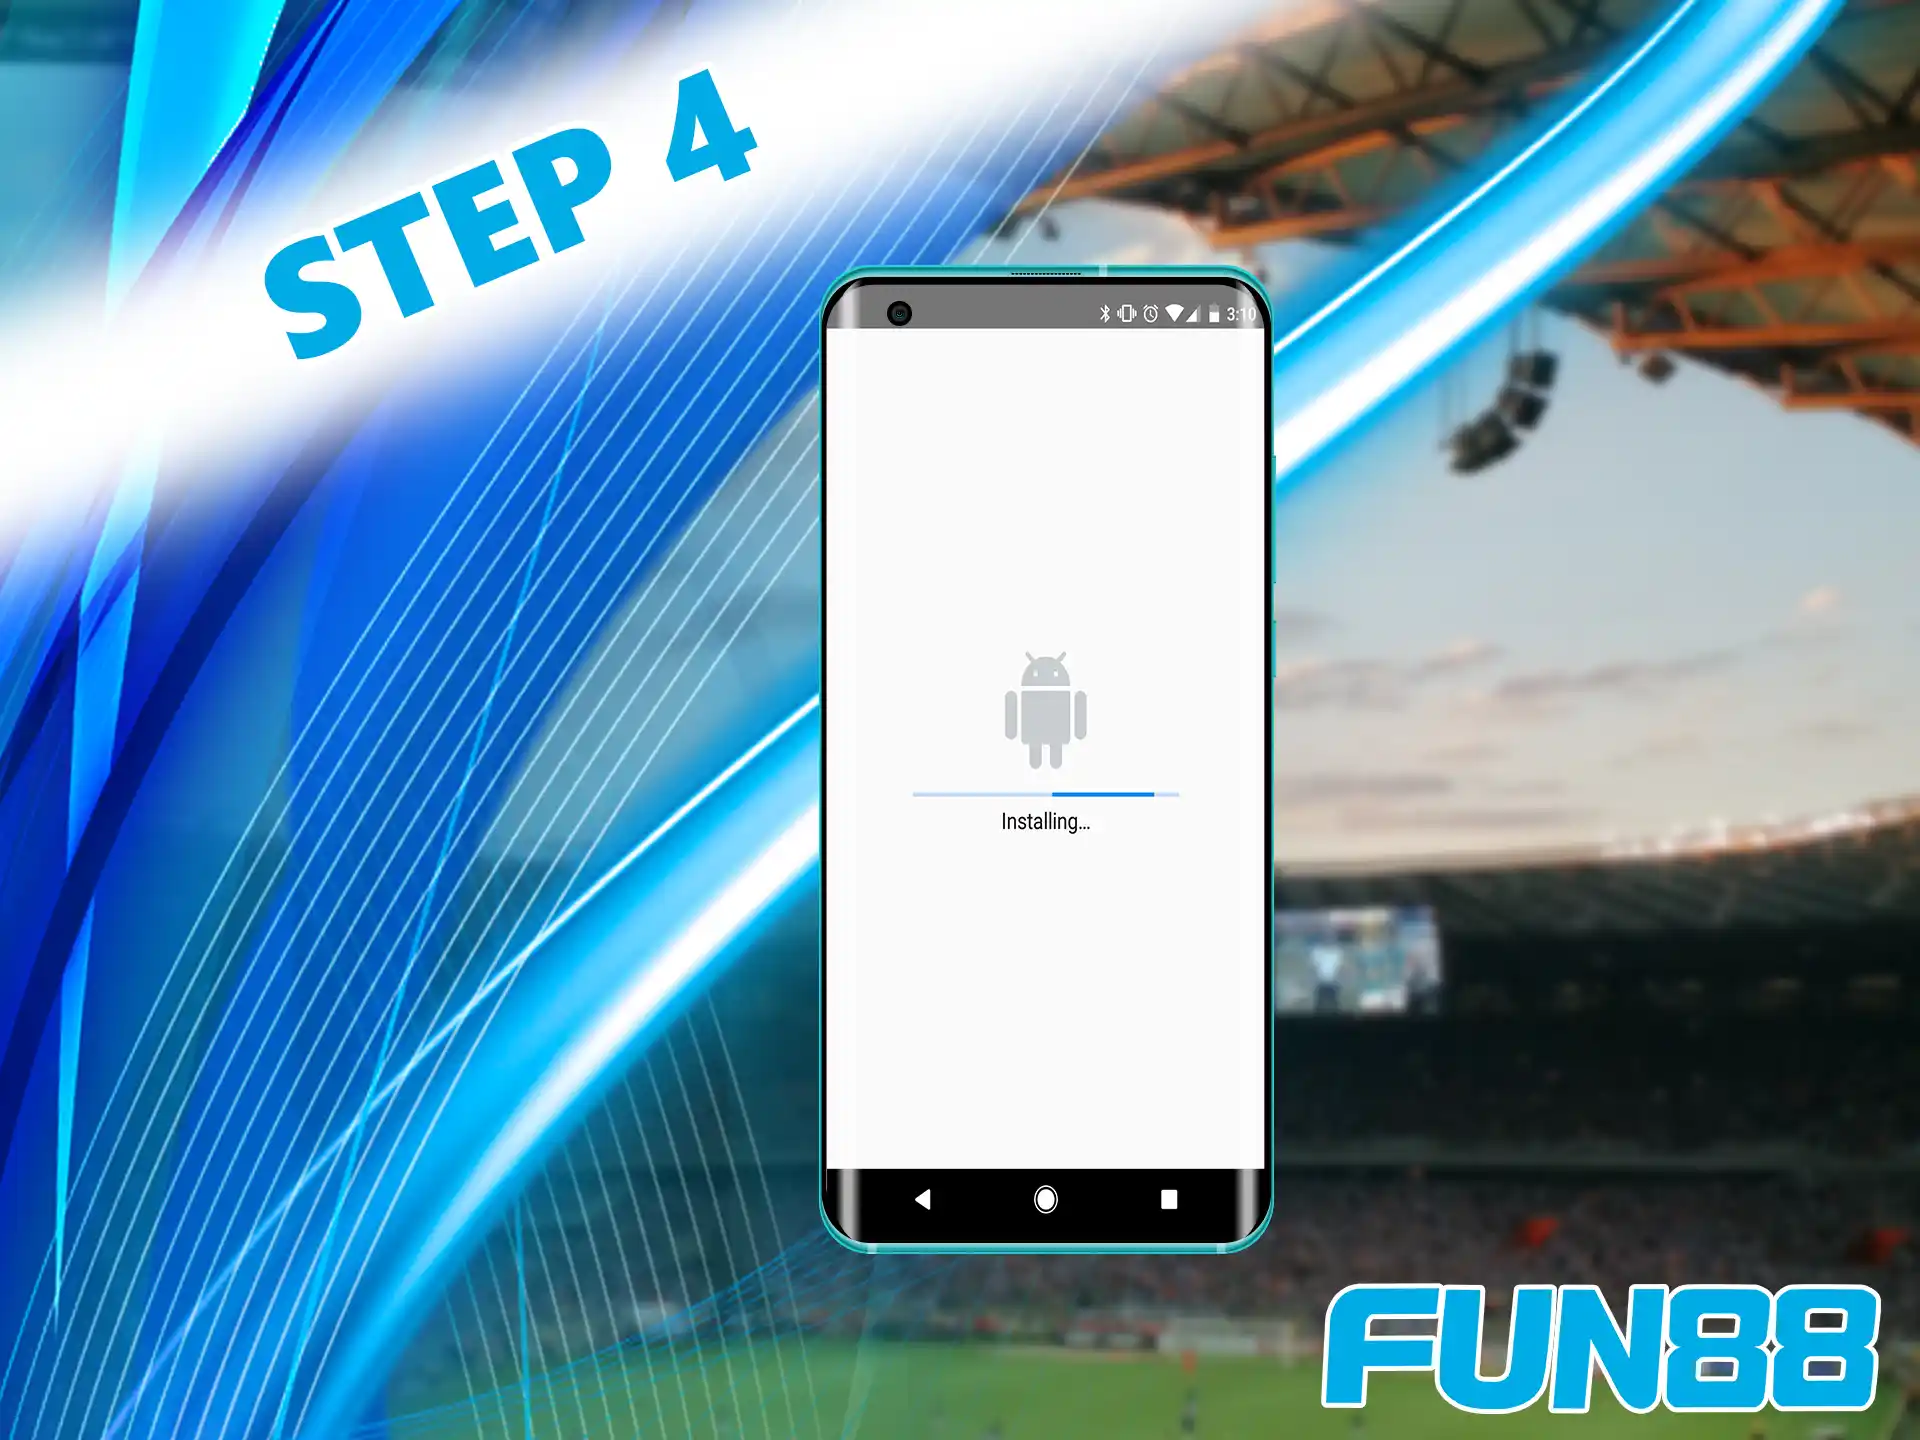 Start the setup process by simply navigating to the download section on your device.